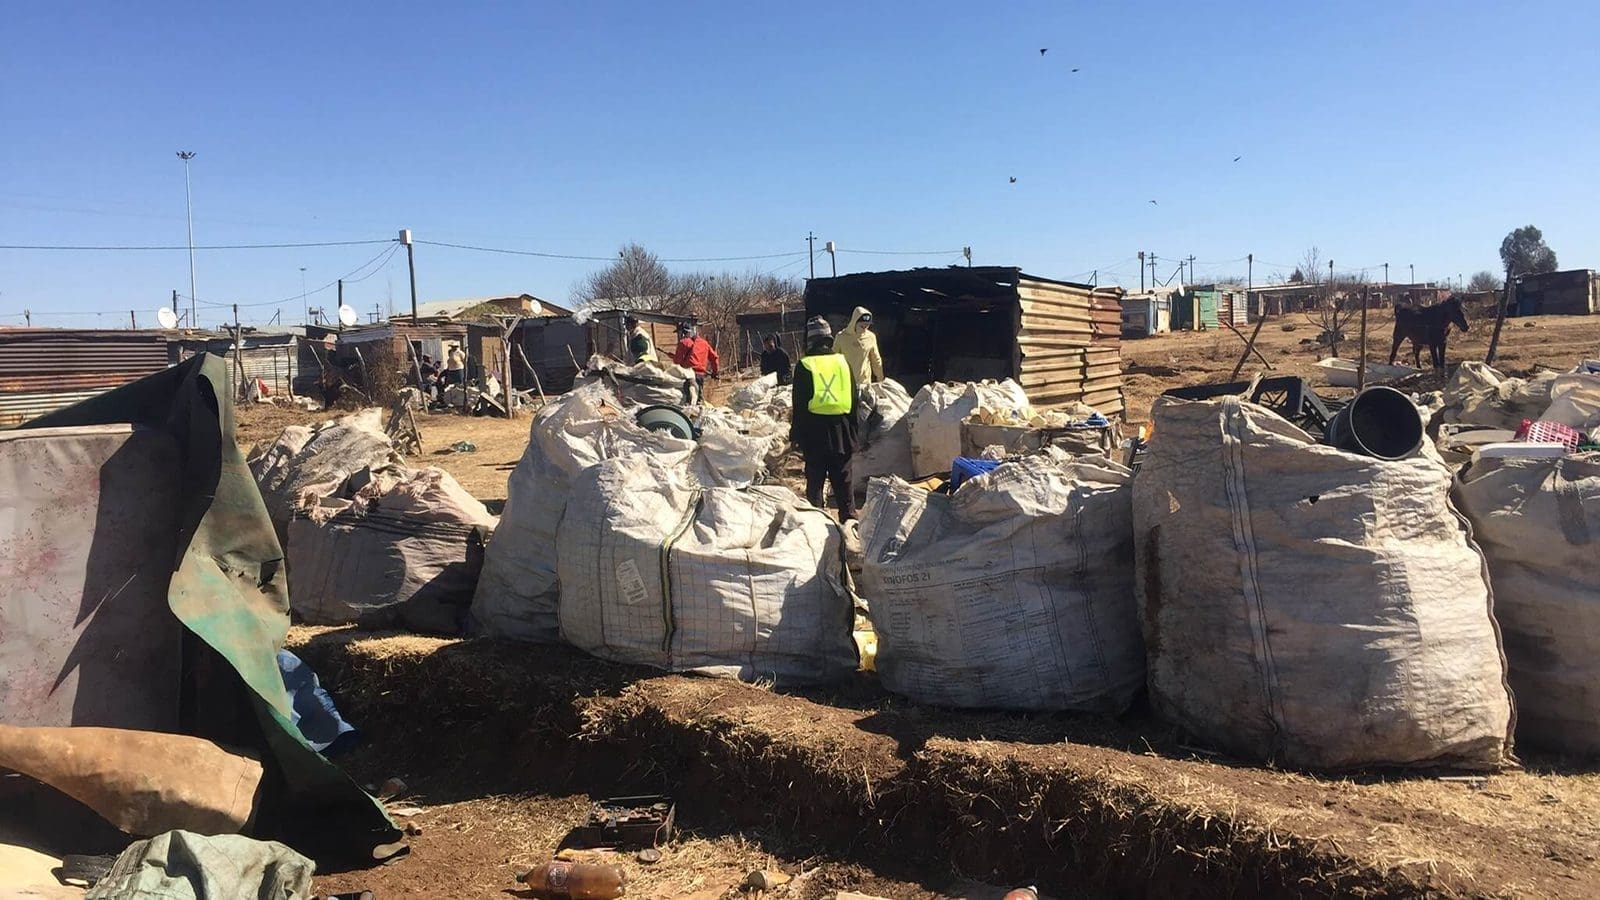 South African Breweries, Corona brand undertake plastic recycling initiative in partnership with Ramtsilo